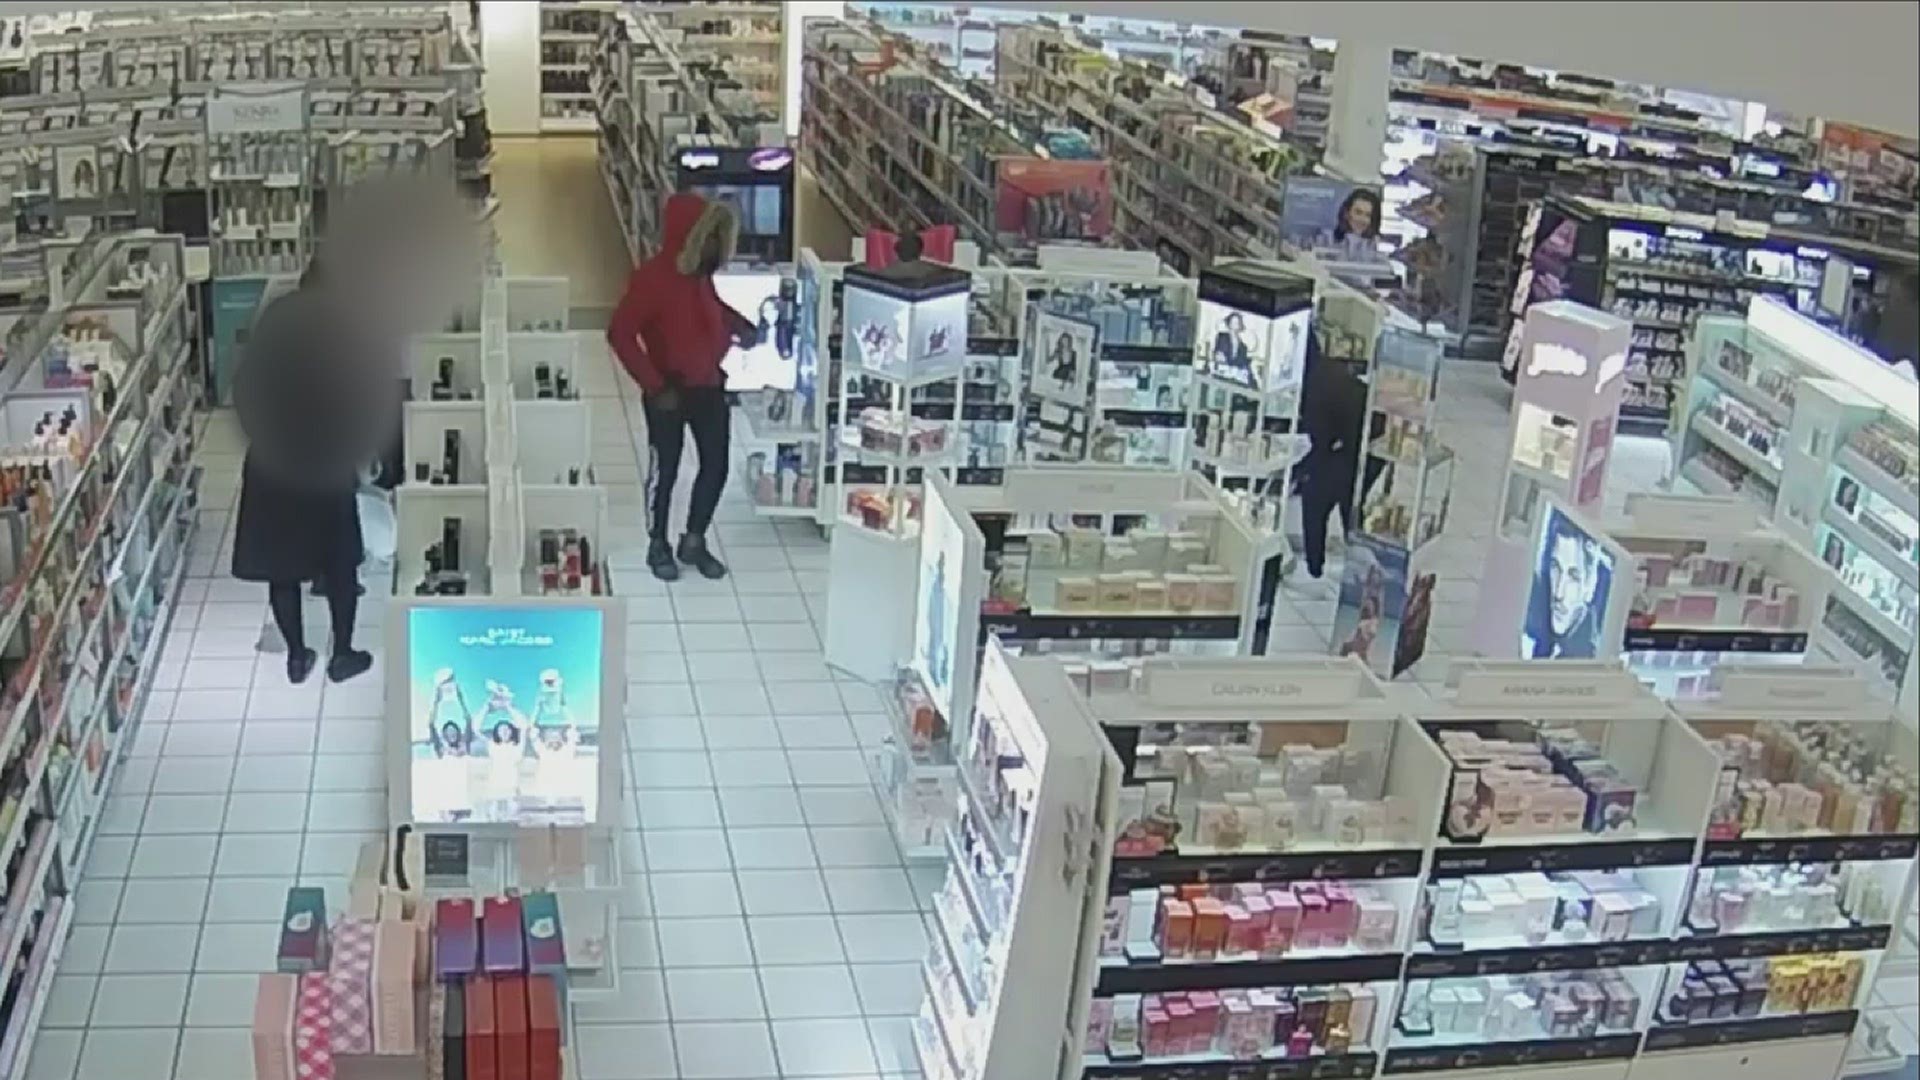 Police have shared a video that depicts several suspects who targeted a local cosmetic store and were able to steal $21,000 in merchandise in just three minutes.